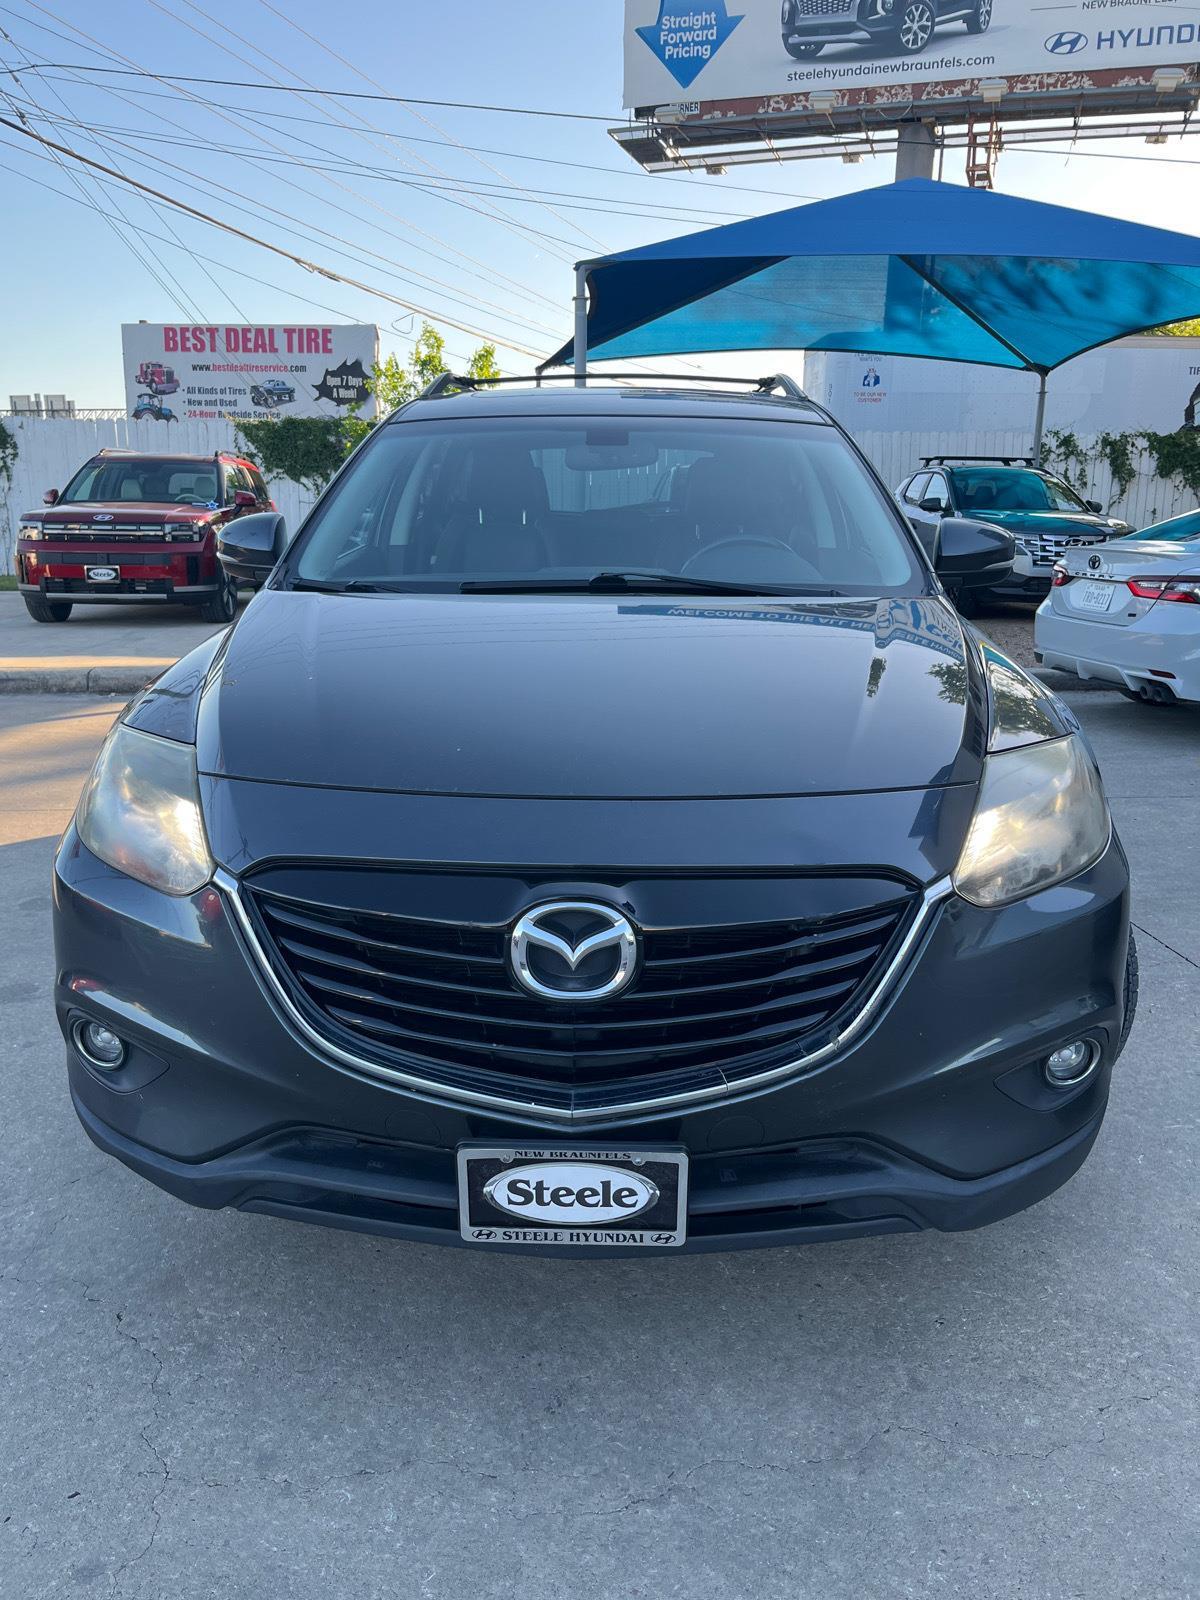 Used 2014 Mazda CX-9 Grand Touring with VIN JM3TB3DV8E0429982 for sale in New Braunfels, TX